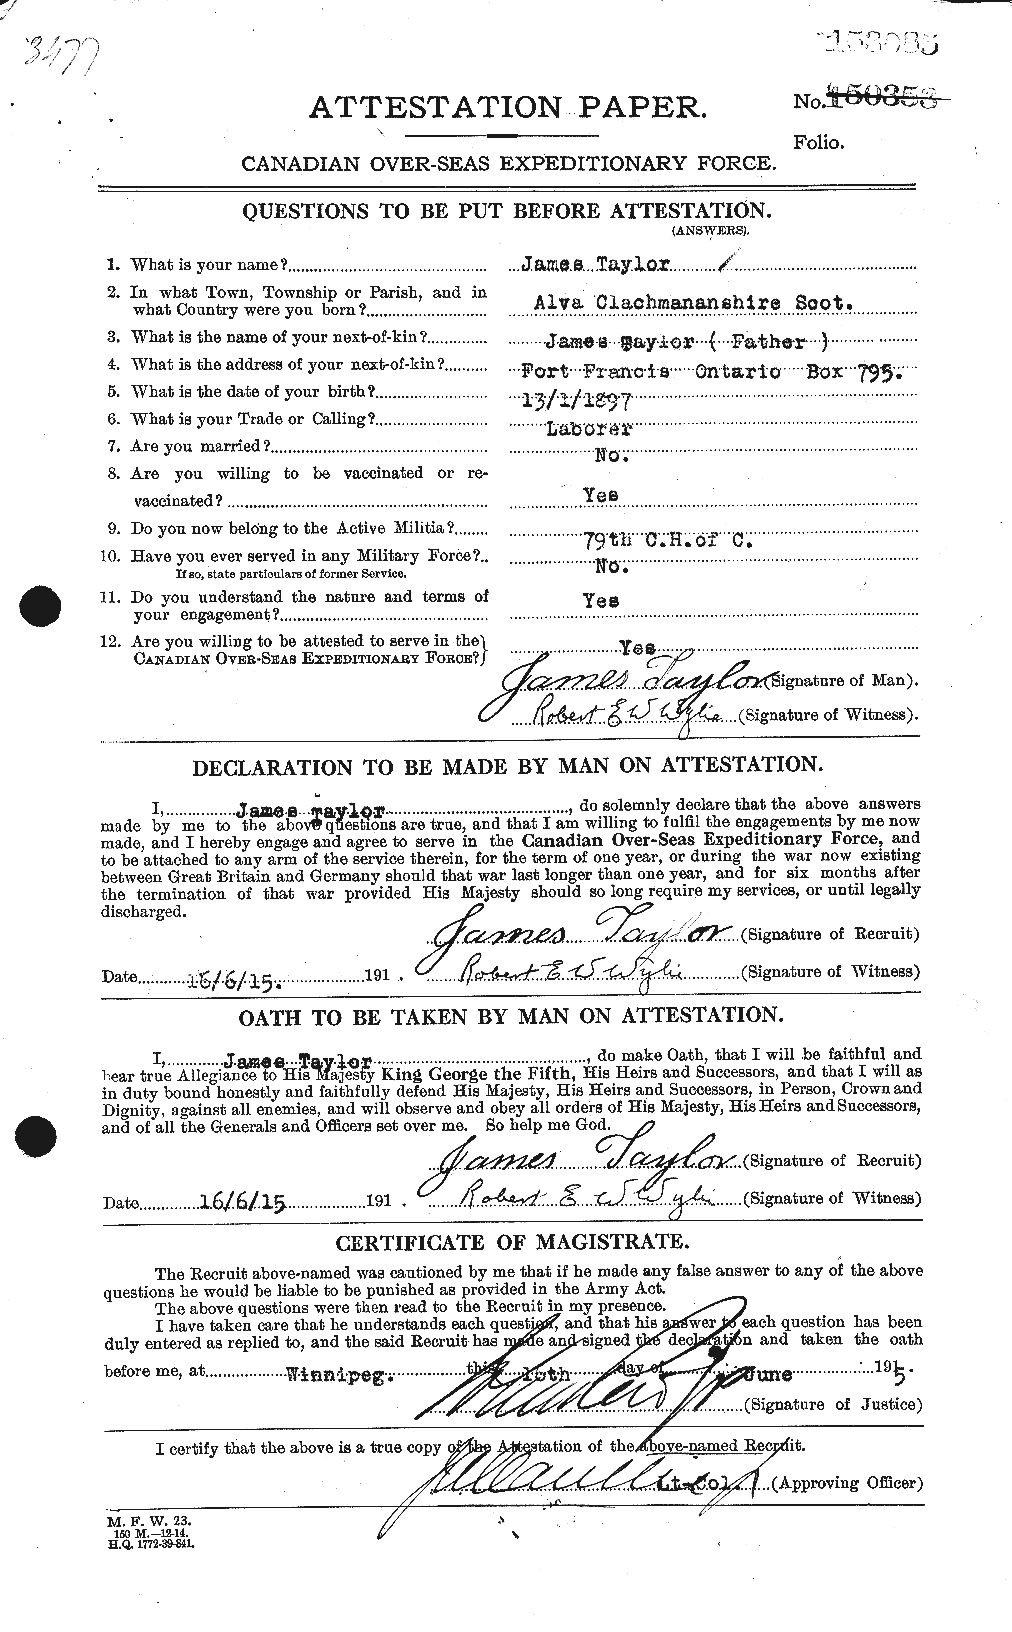 Personnel Records of the First World War - CEF 626673a